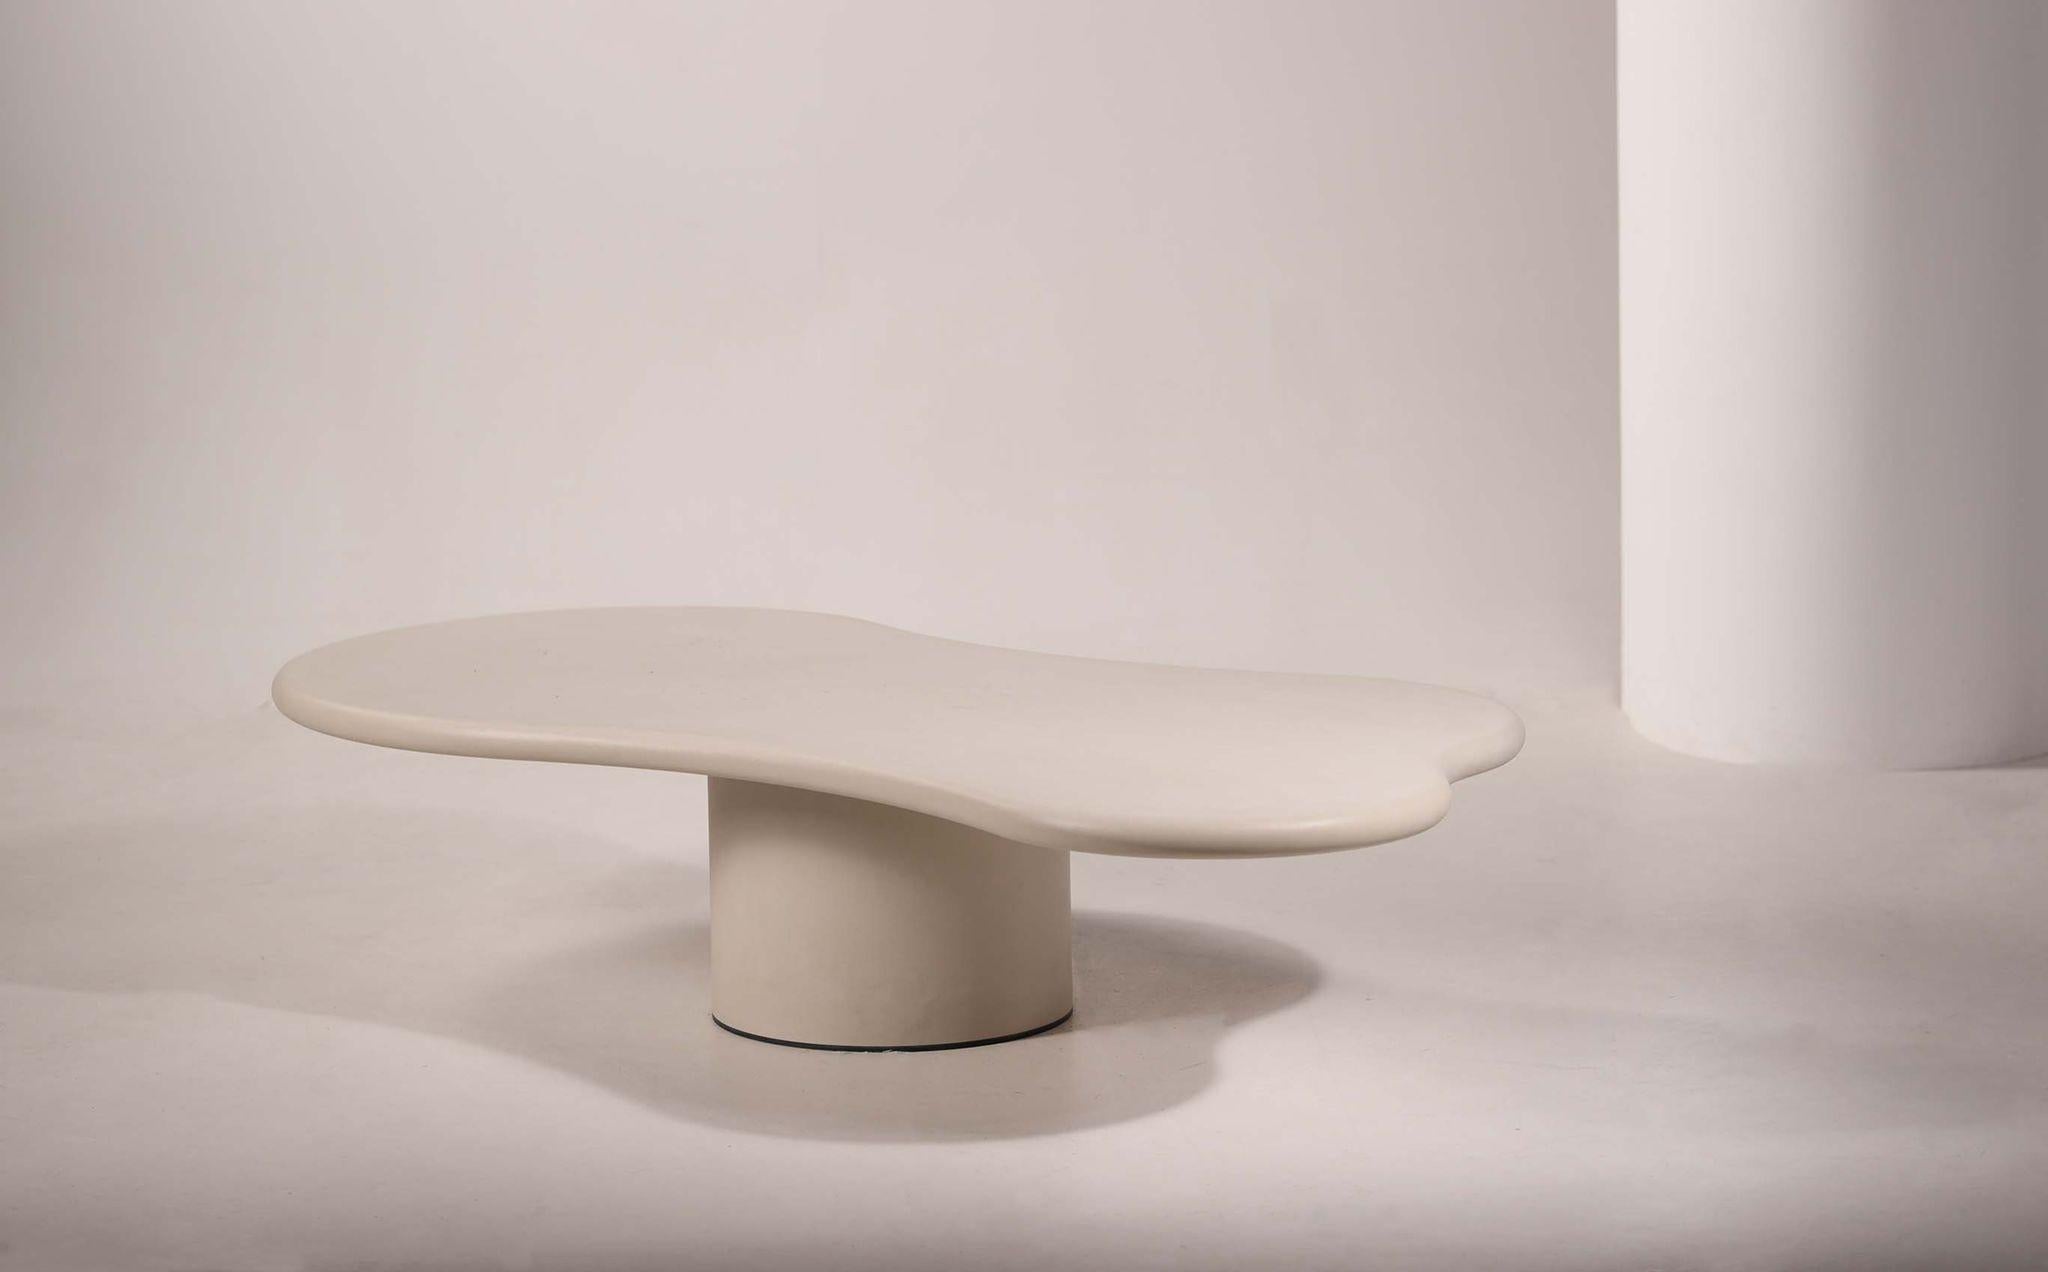 Organic Material Handmade Rock-Shaped Natural Plaster Table Set by Galerie Philia Edition